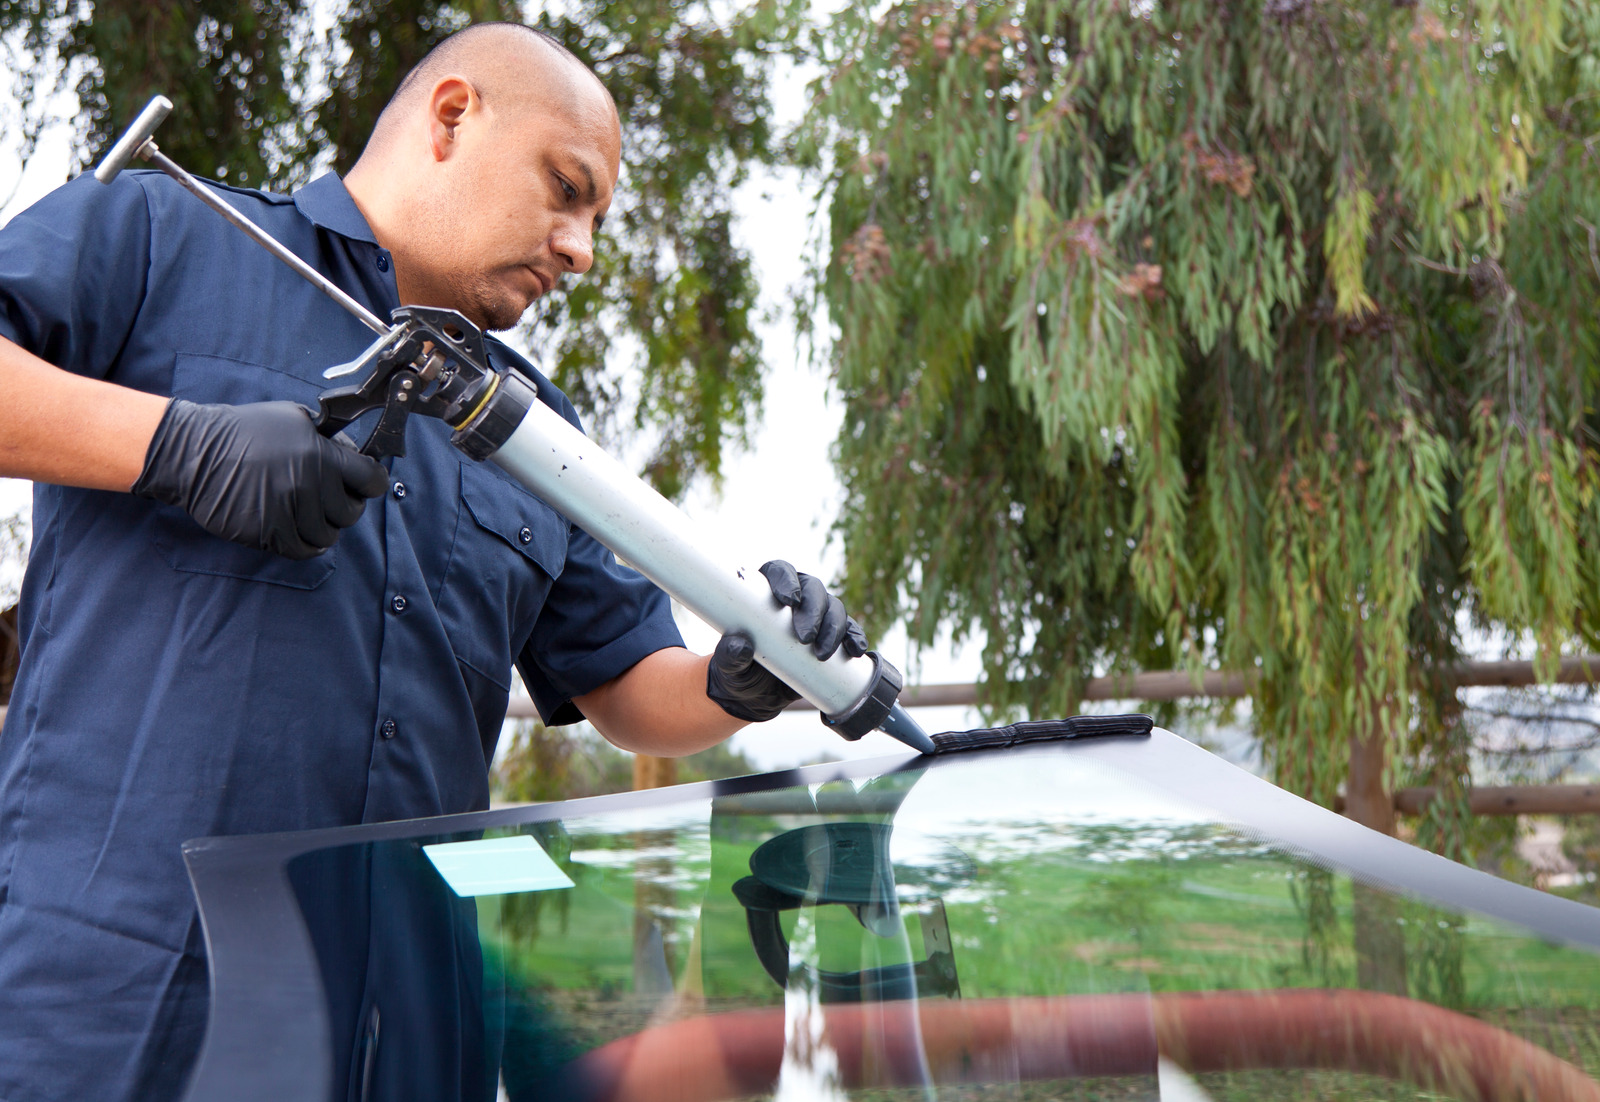 chip repair or a complete Windshield and Glass Repair in Spruce Grove